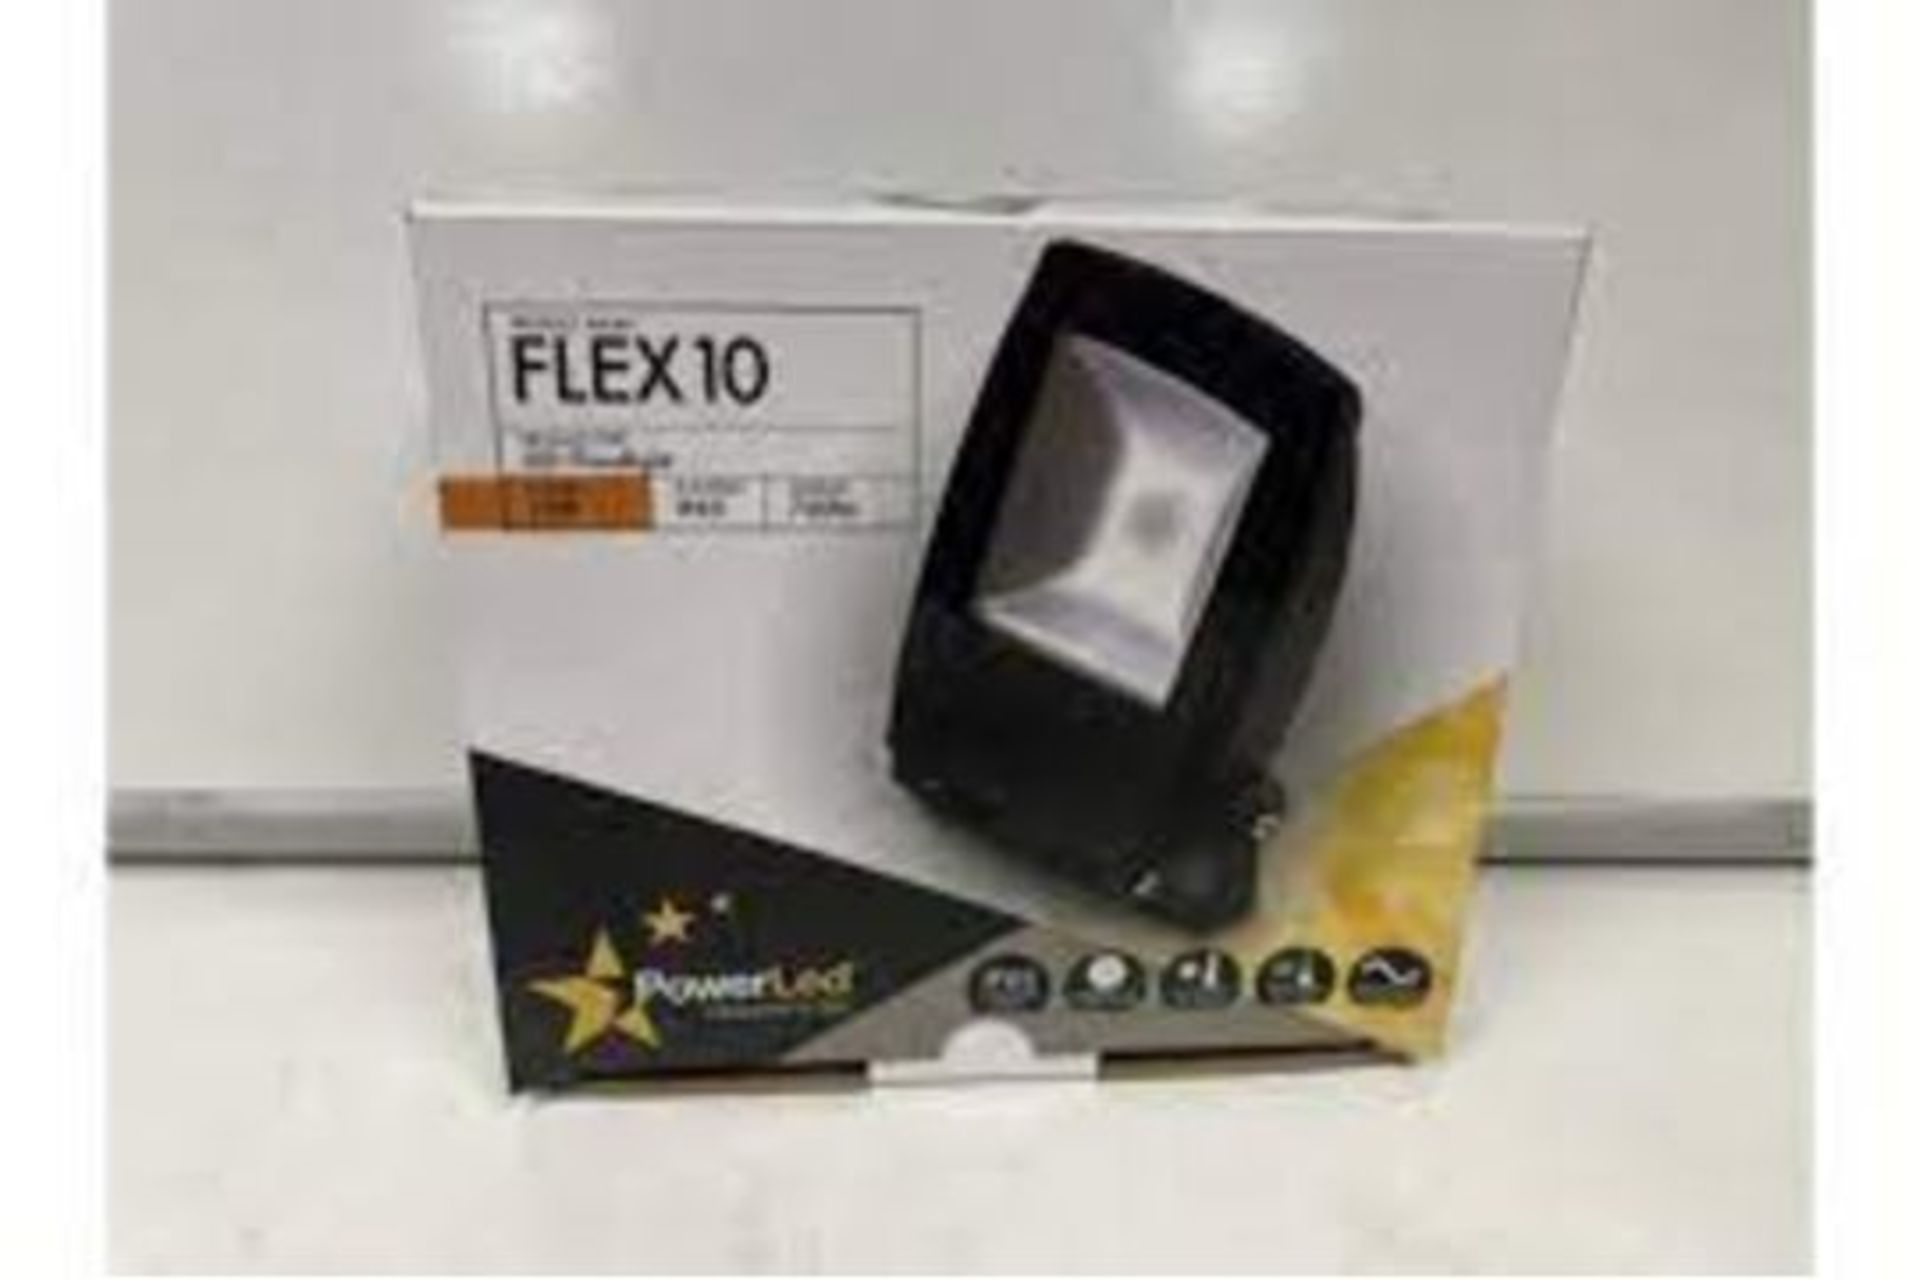 TRADE LOT 36 X NEW BOXED POWER LED FLEX 10 LED FLOODLIGHTS. 10W. IP65 RATED. 750 LUMENS. ROW6.7RACK - Image 2 of 2